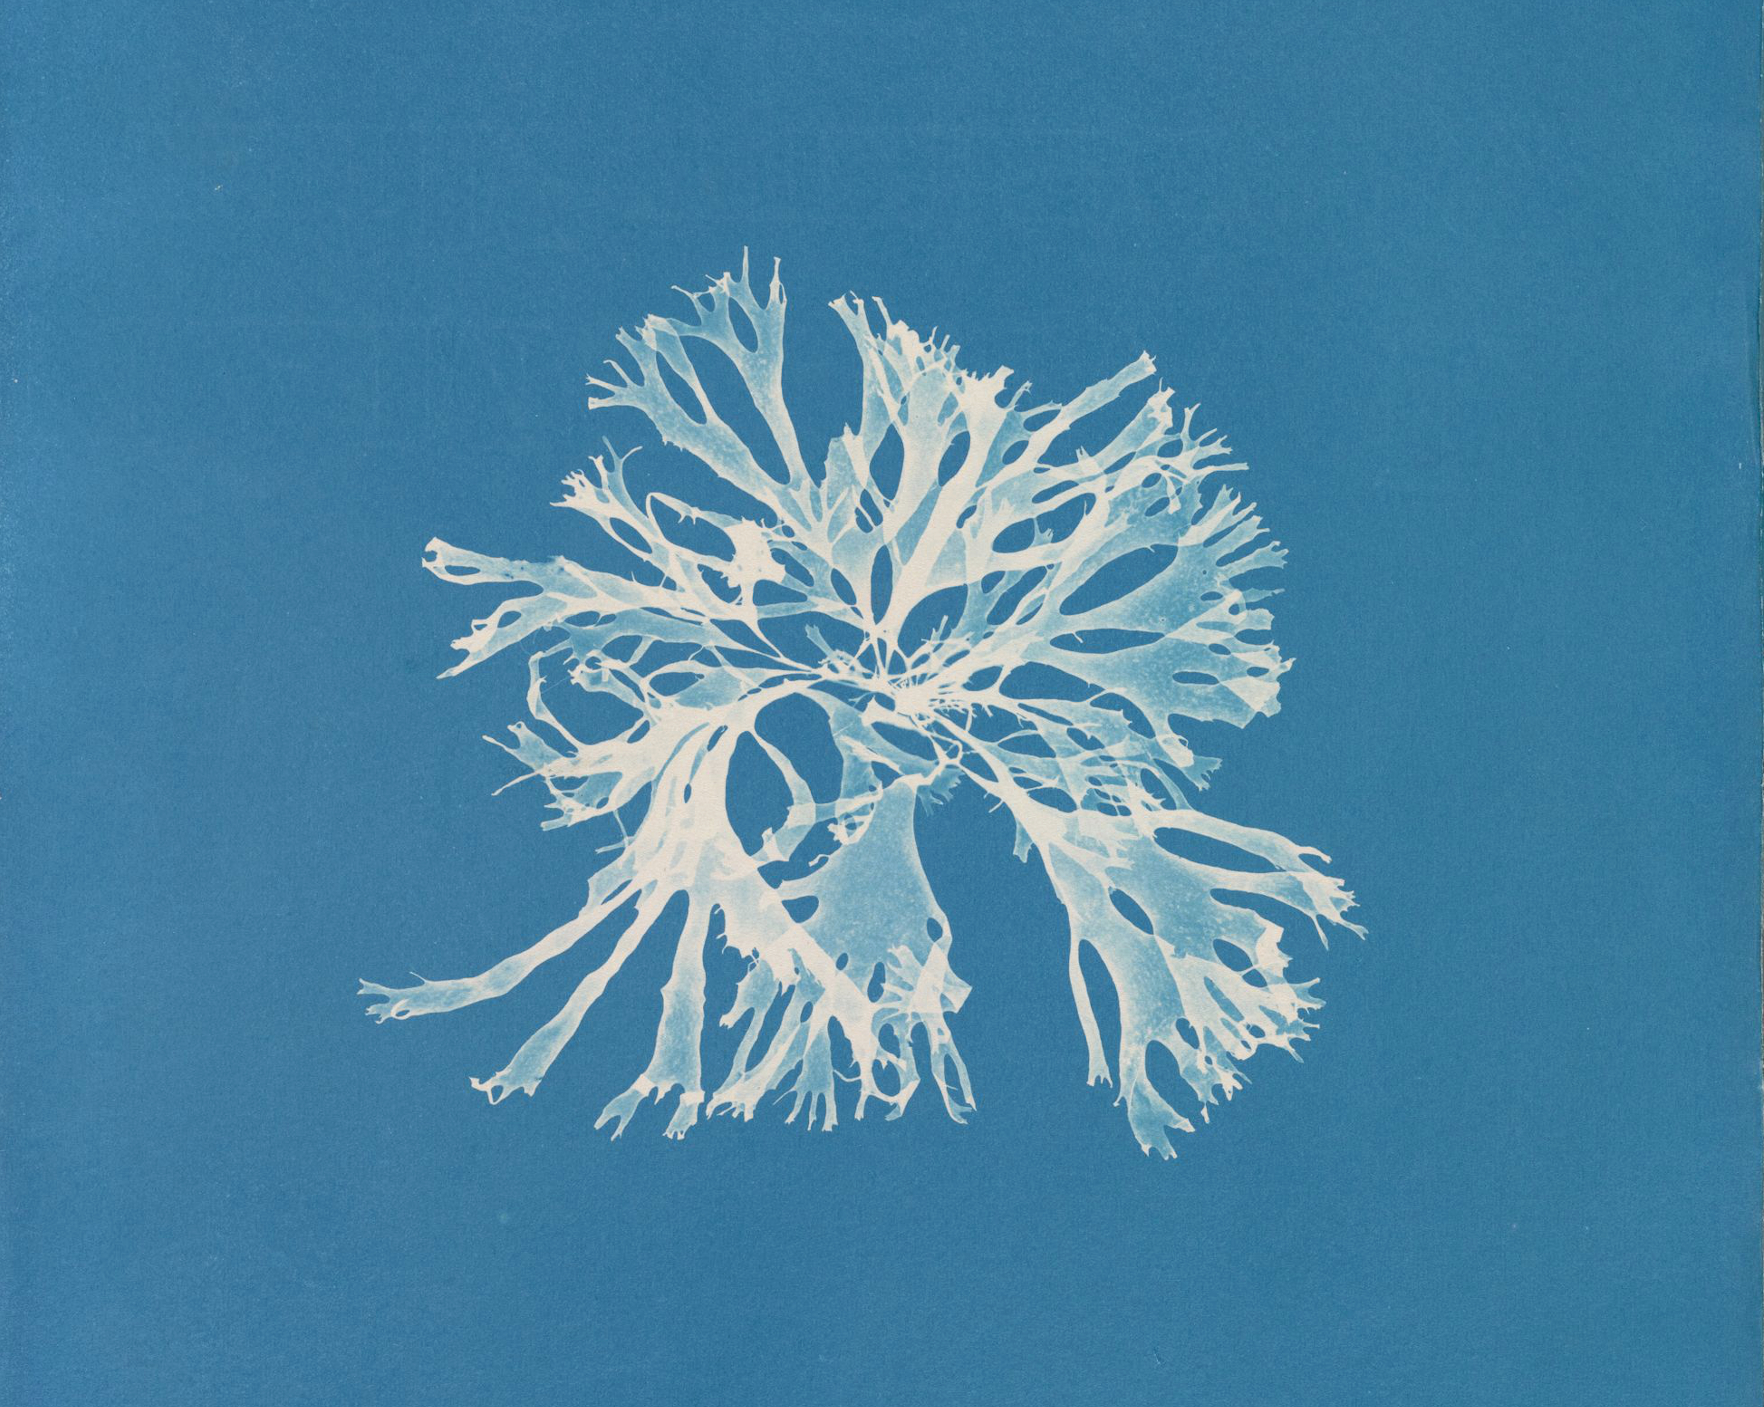 Cyanotypes: The origins of photography